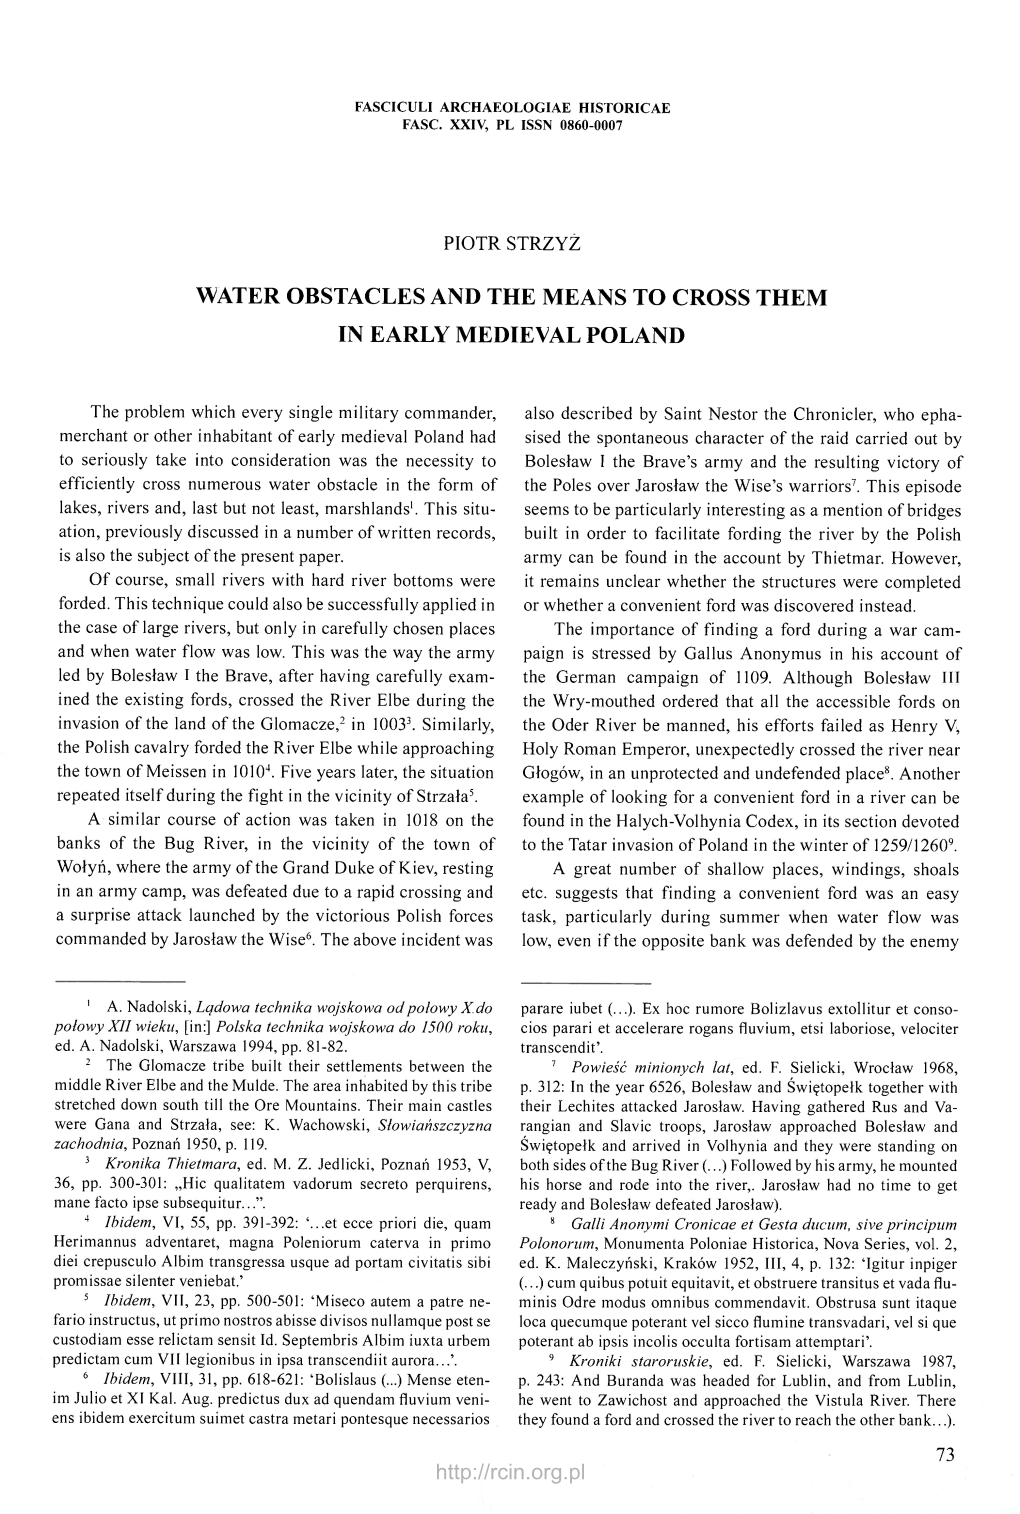 Water Obstacles and the Means to Cross Them in Early Medieval Poland